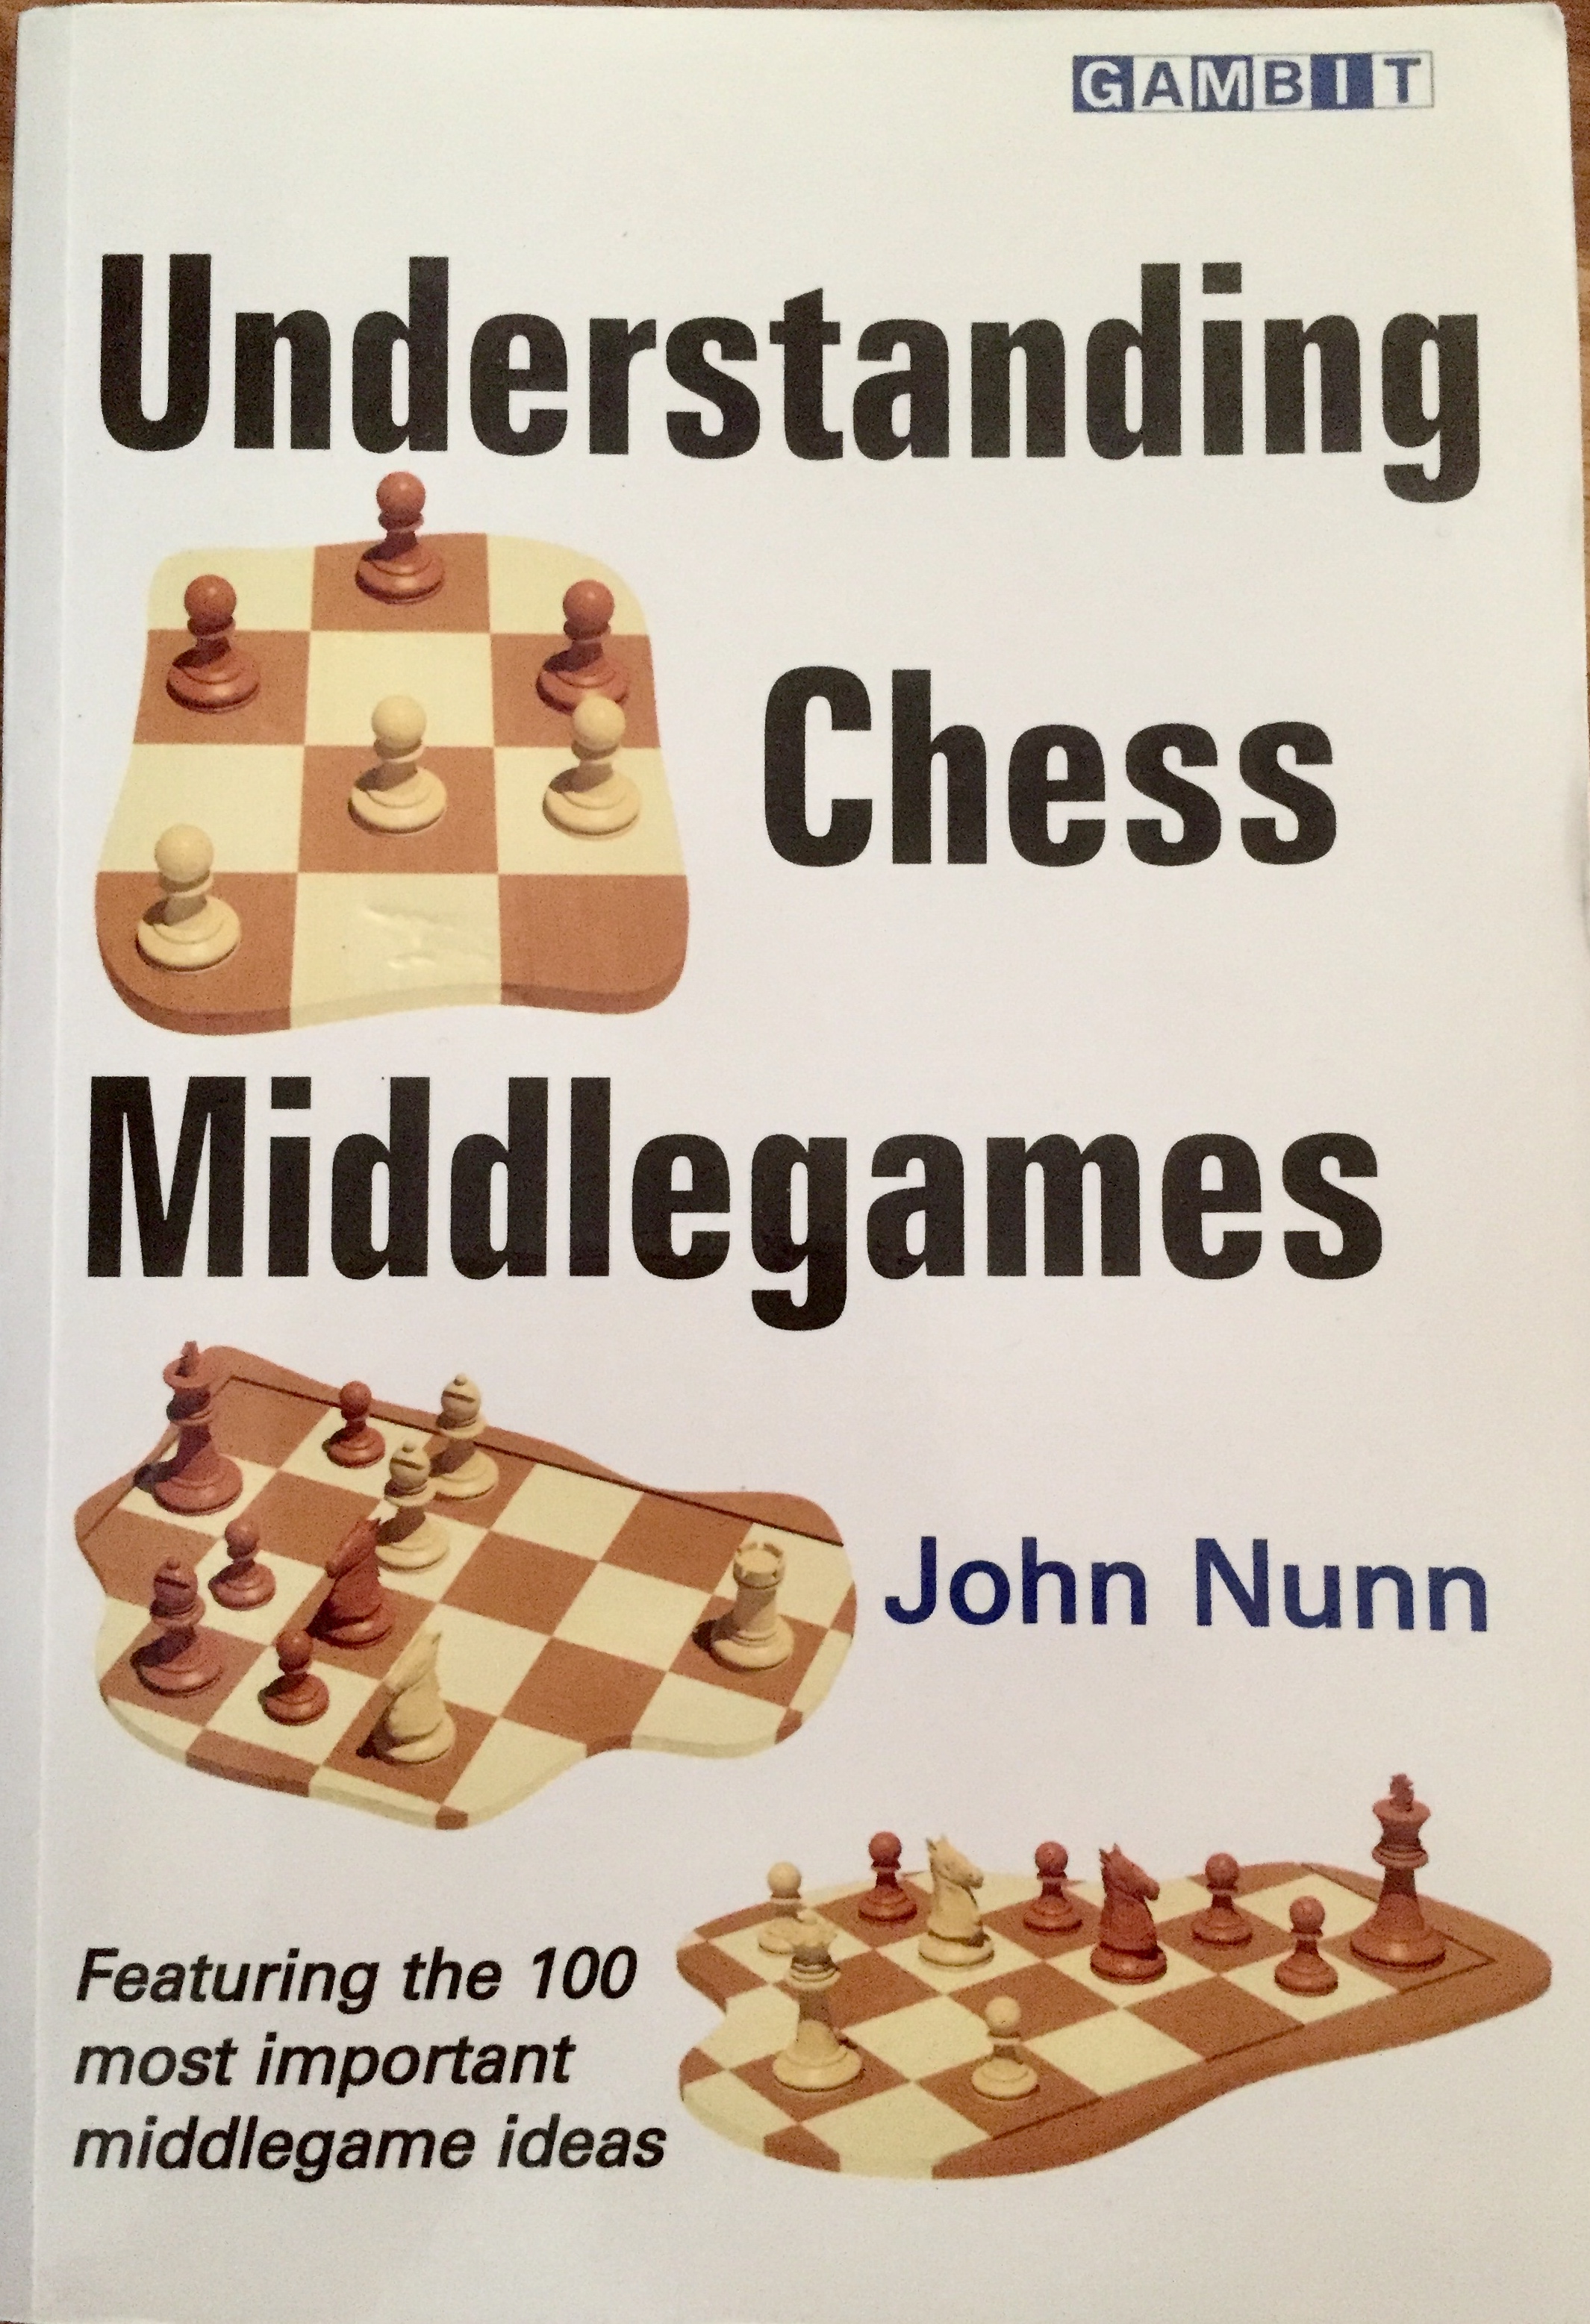 How to increase ratings from 1500 to 1800 in just 3 months? - Chess Forums  